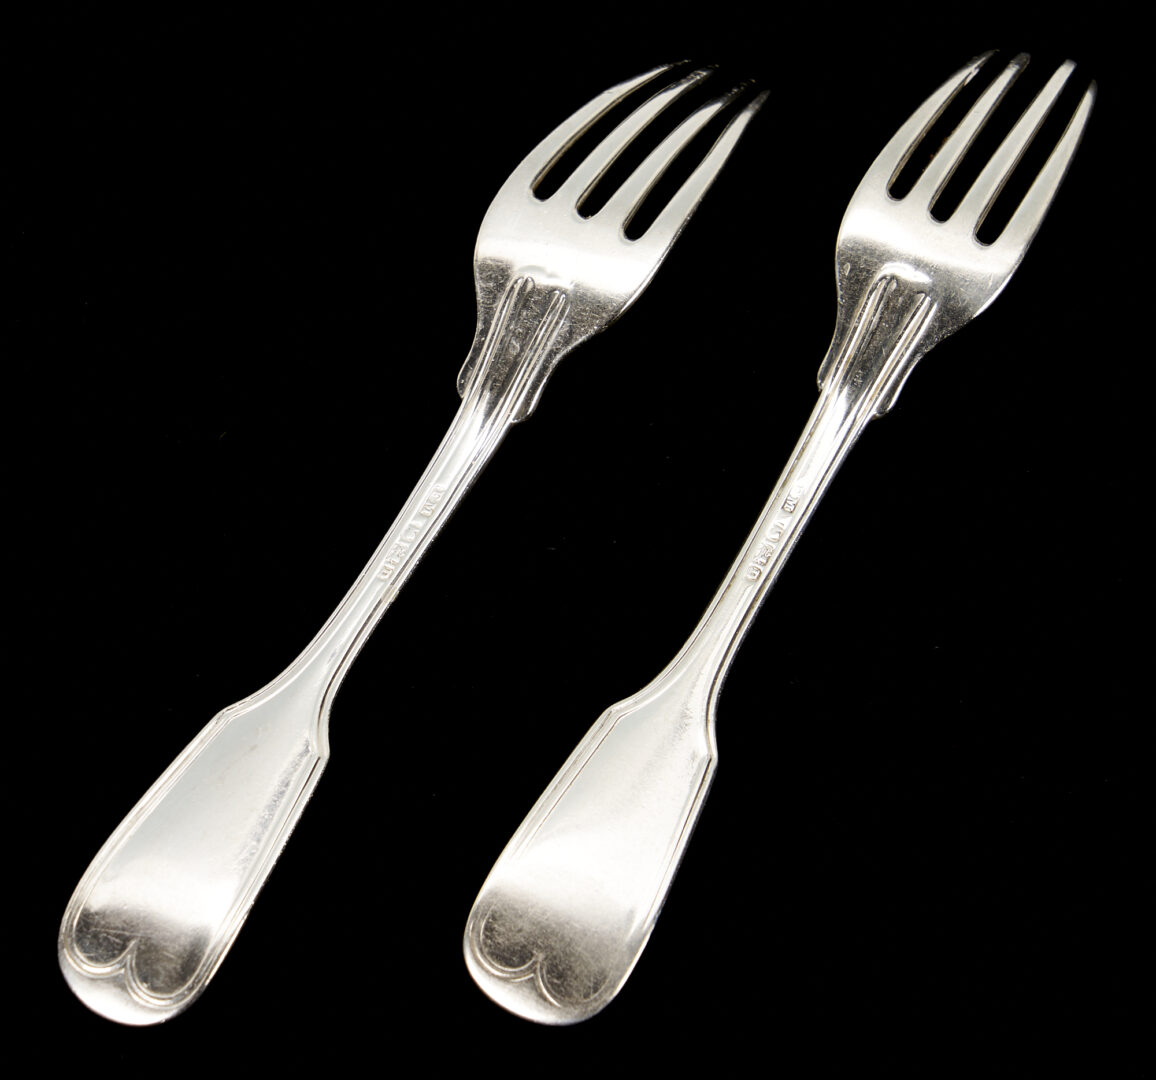 Lot 653: Group Marquand Coin Silver Flatware inc. knives, forks